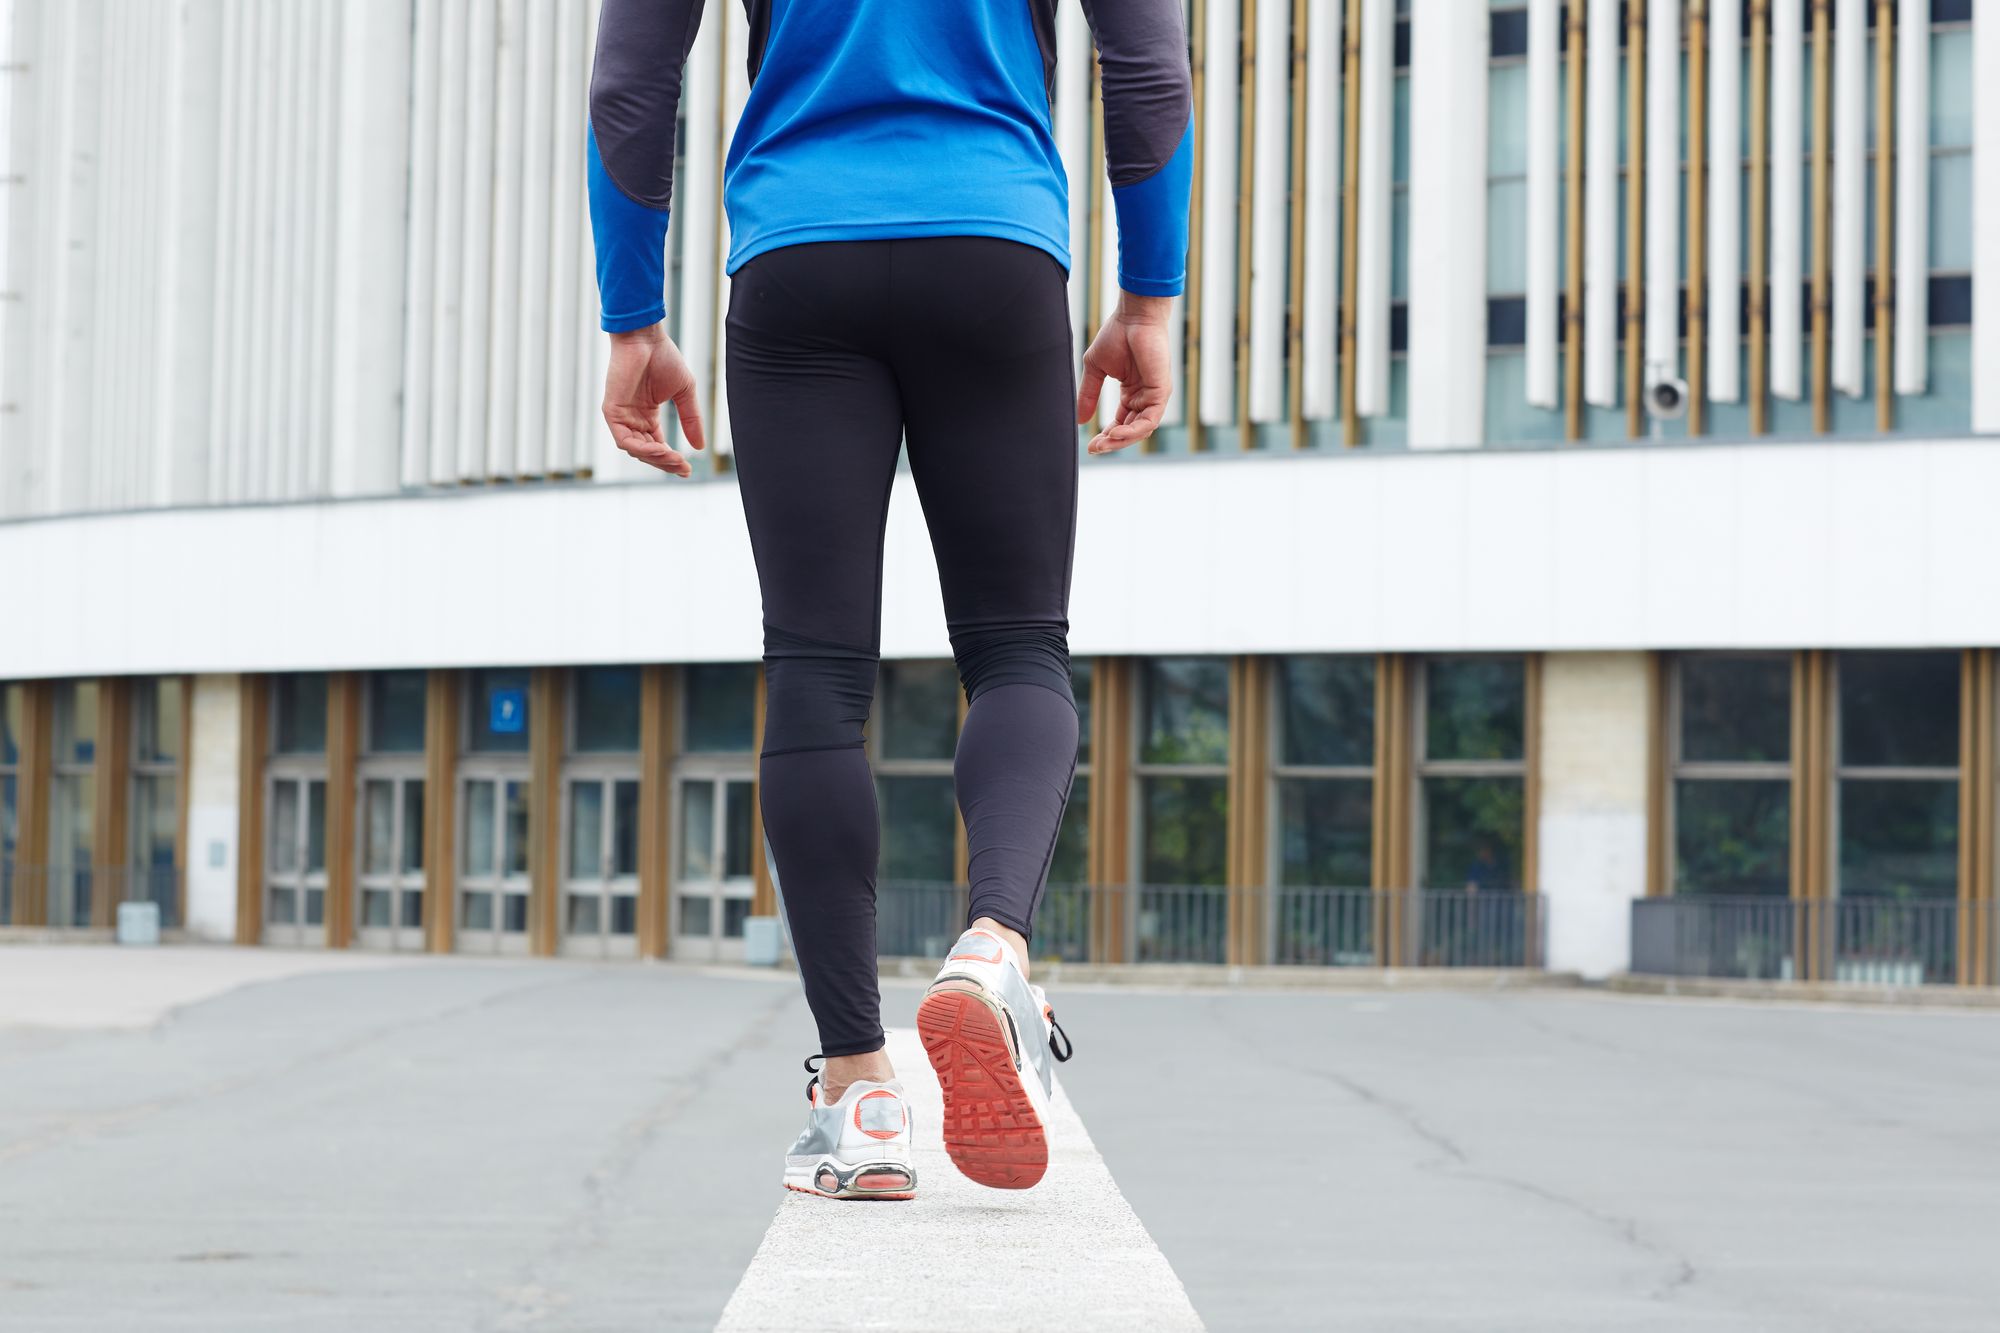 How to Get More Out of Your 3-Mile Walk (Amplify Calorie Burn and Save Time)